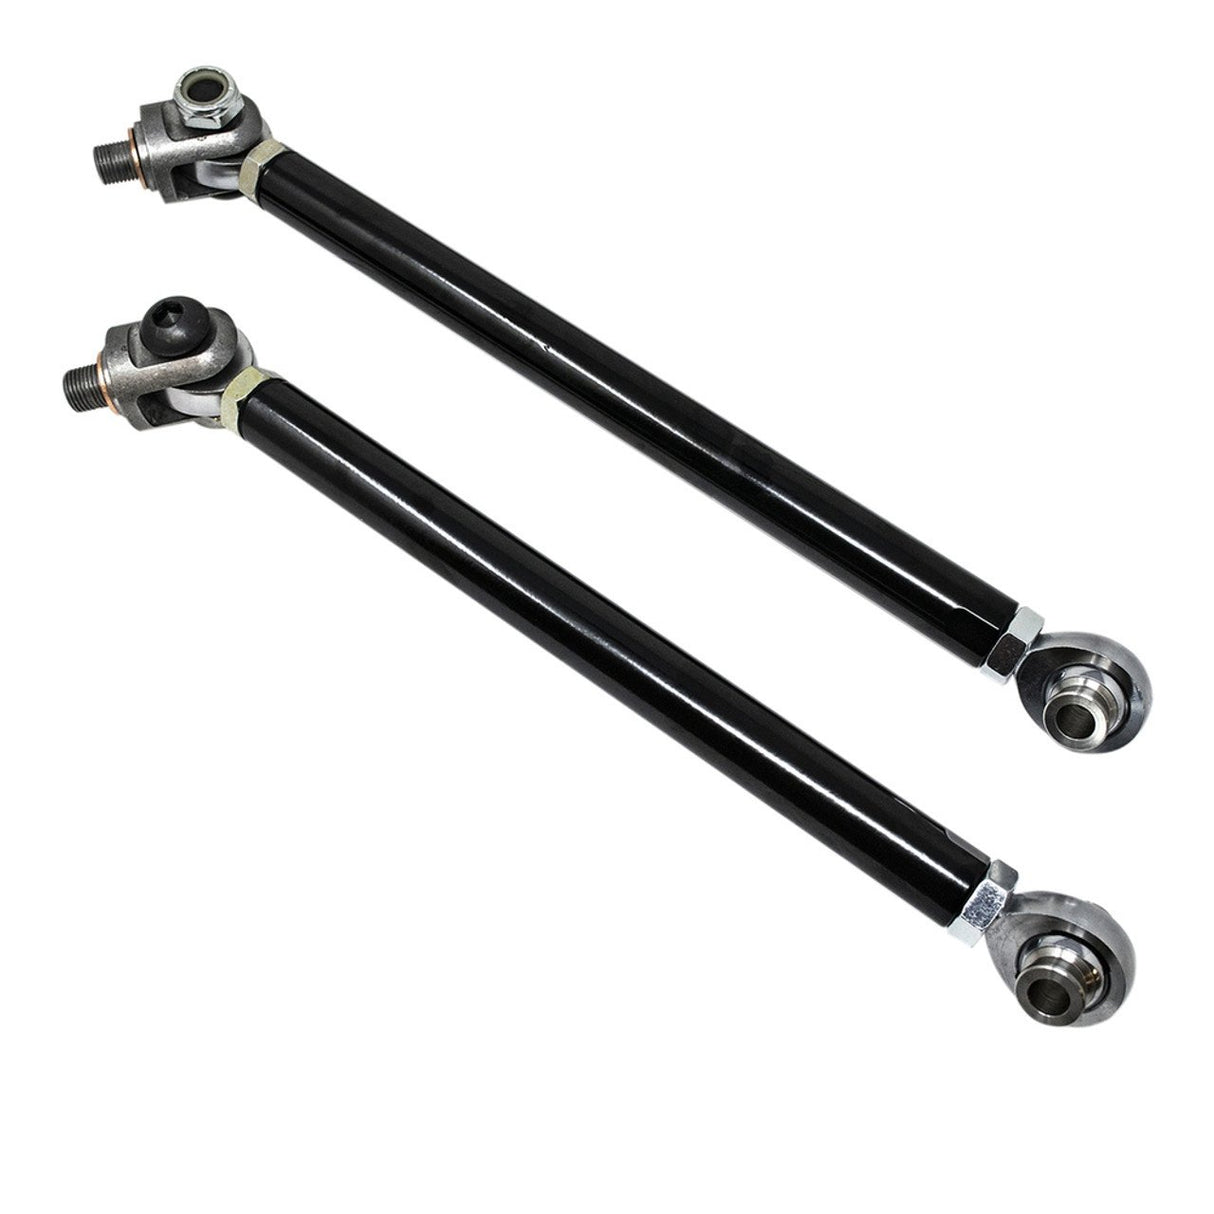 S3 Power Sports Can-Am Defender Tie Rods